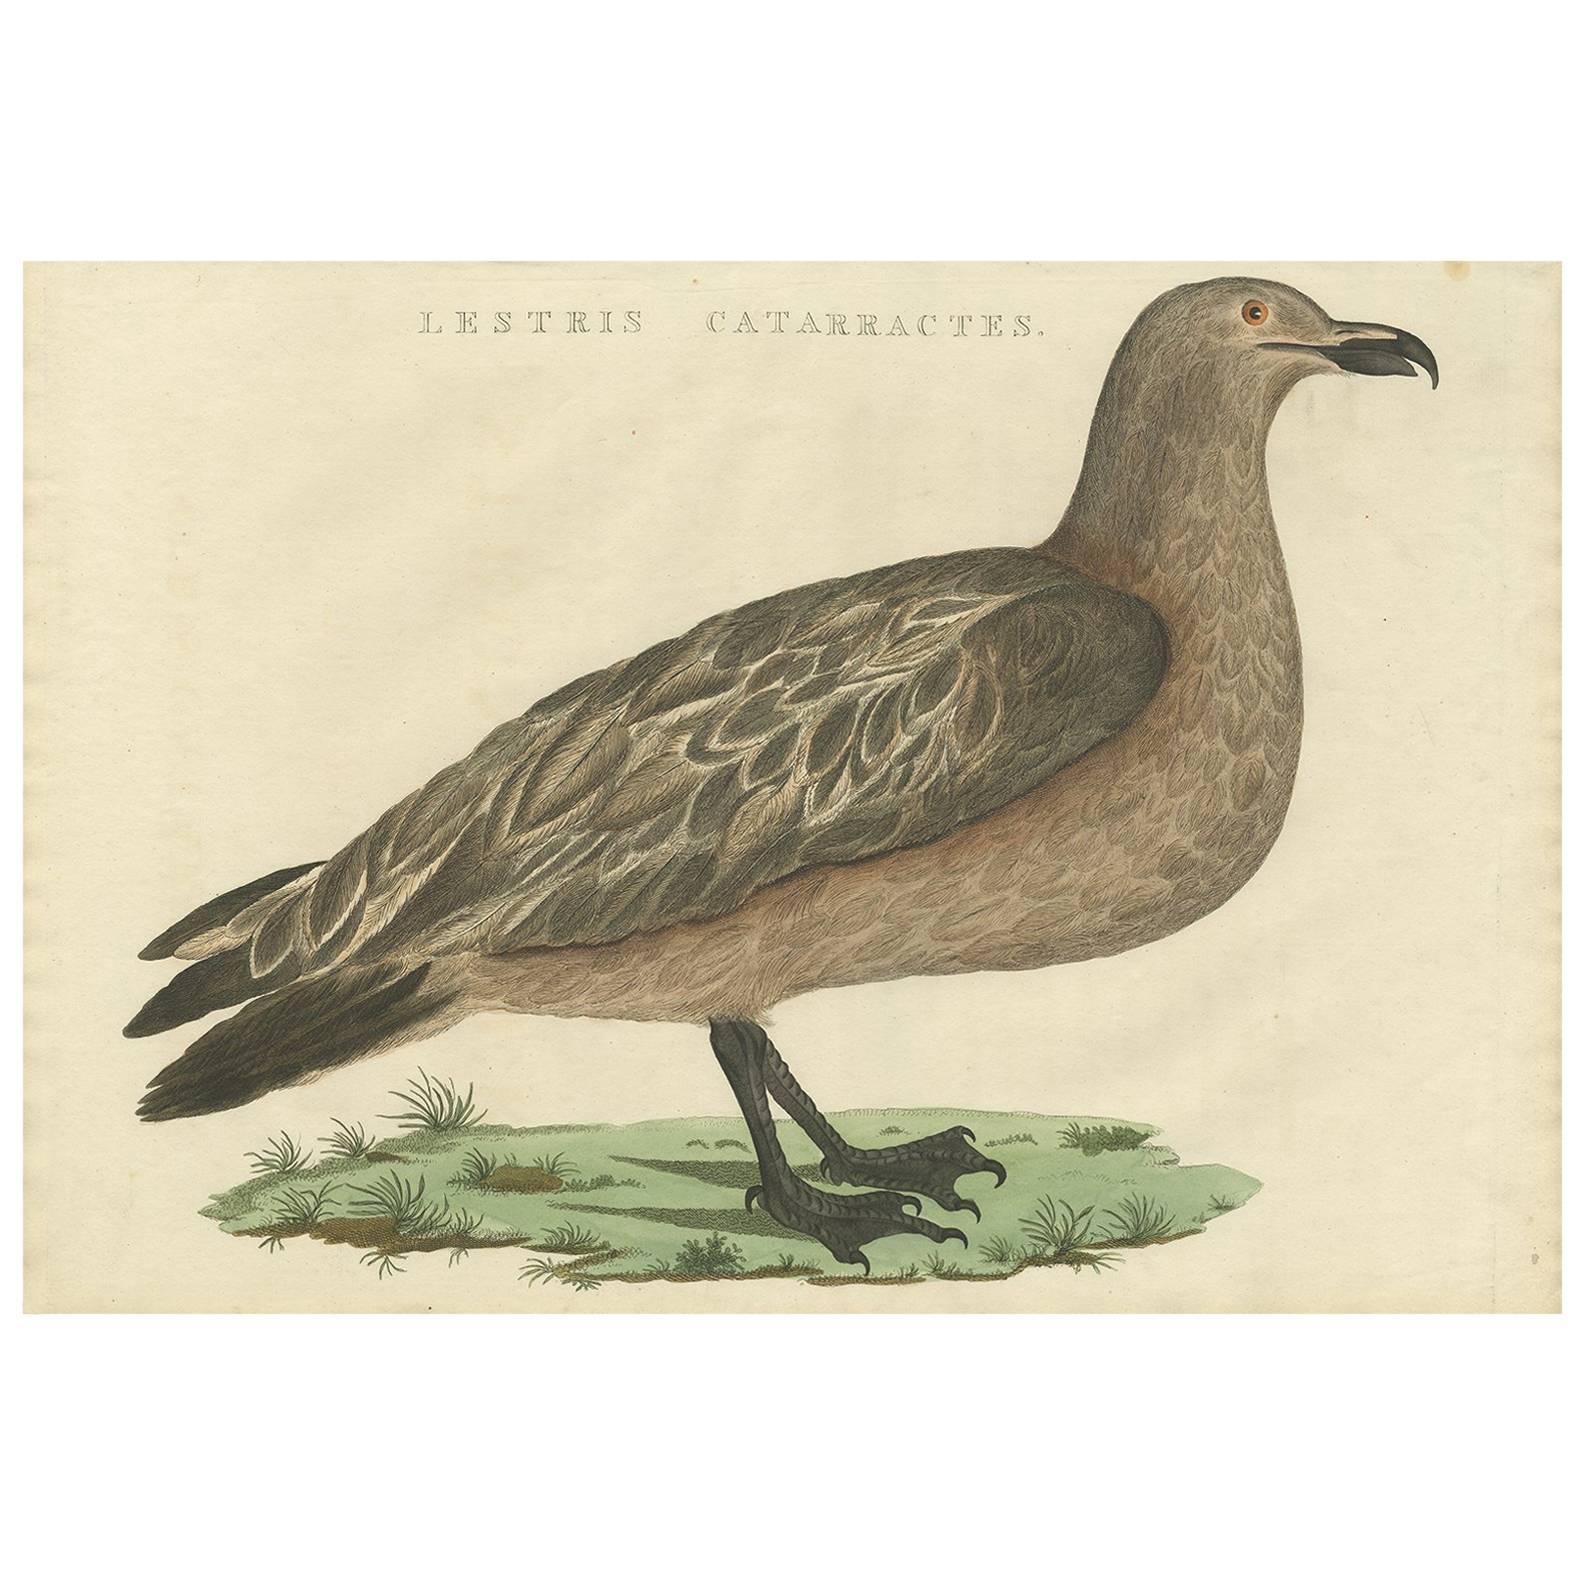 Antique Bird Print of the Great Skua by Sepp & Nozeman, 1829 For Sale